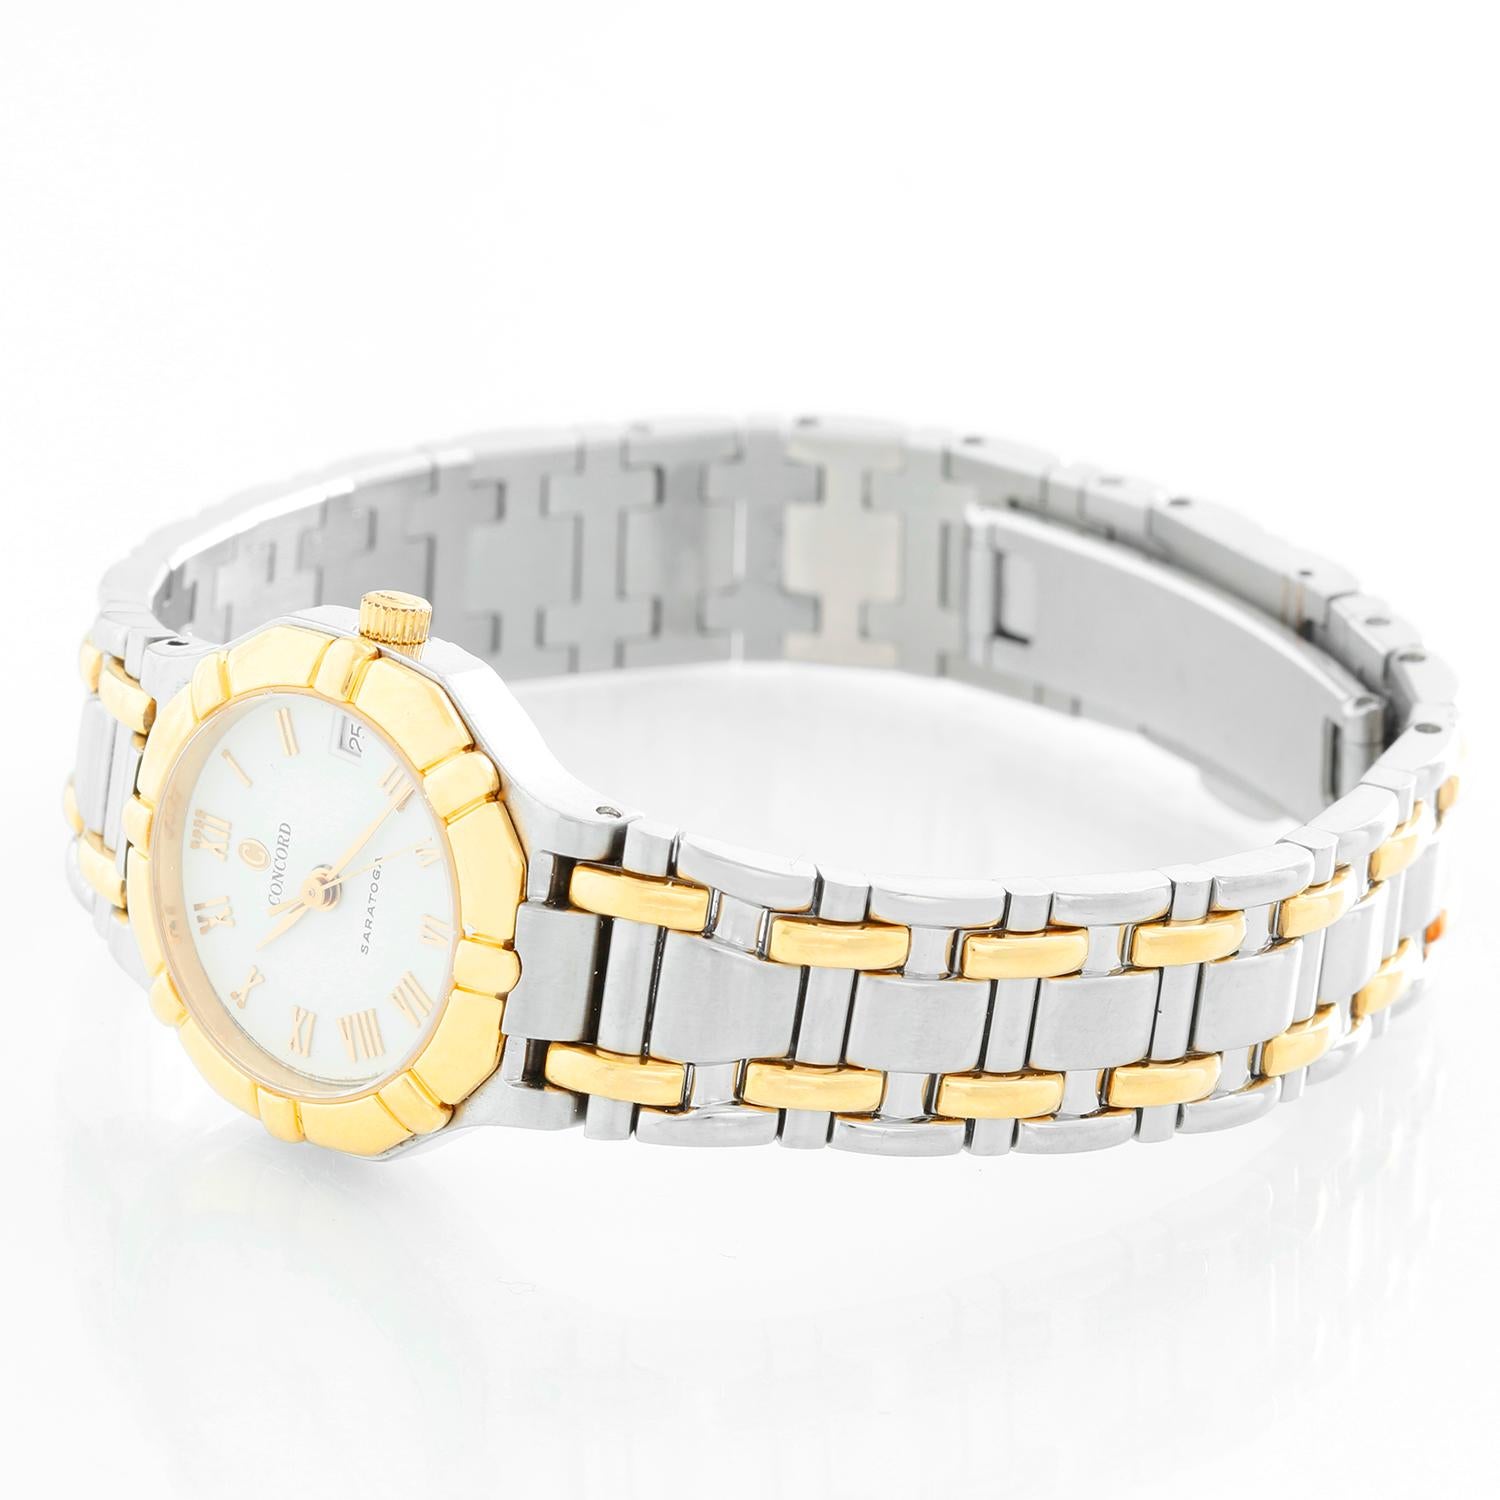 Concord  Saratoga Two- Tone Ladies Watch  - Quartz . Stainless steel and yellow gold with a smooth bezel ( 24 mm ) . White dial with raised gold Roman numerals . Two-tone bracelet; will fit up to a 6.5 inch wrist . Pre-owned Concord box and books .